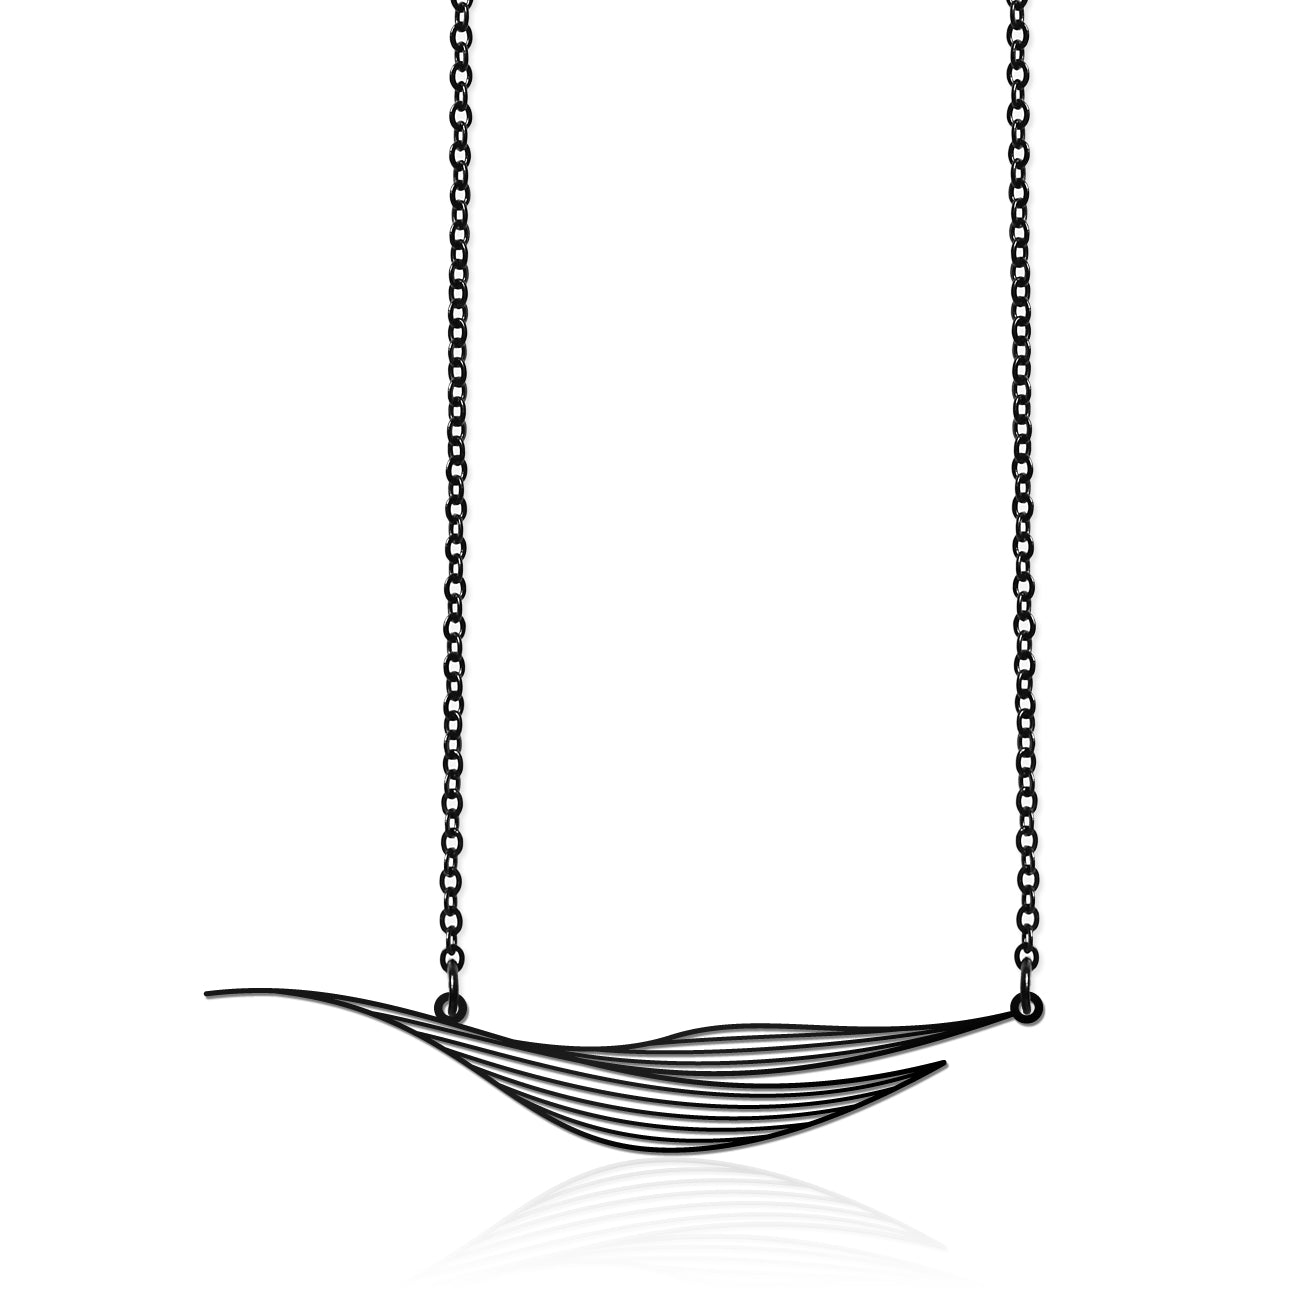 RIPPLE PENDANT SMALL BLACK WITH CHAIN